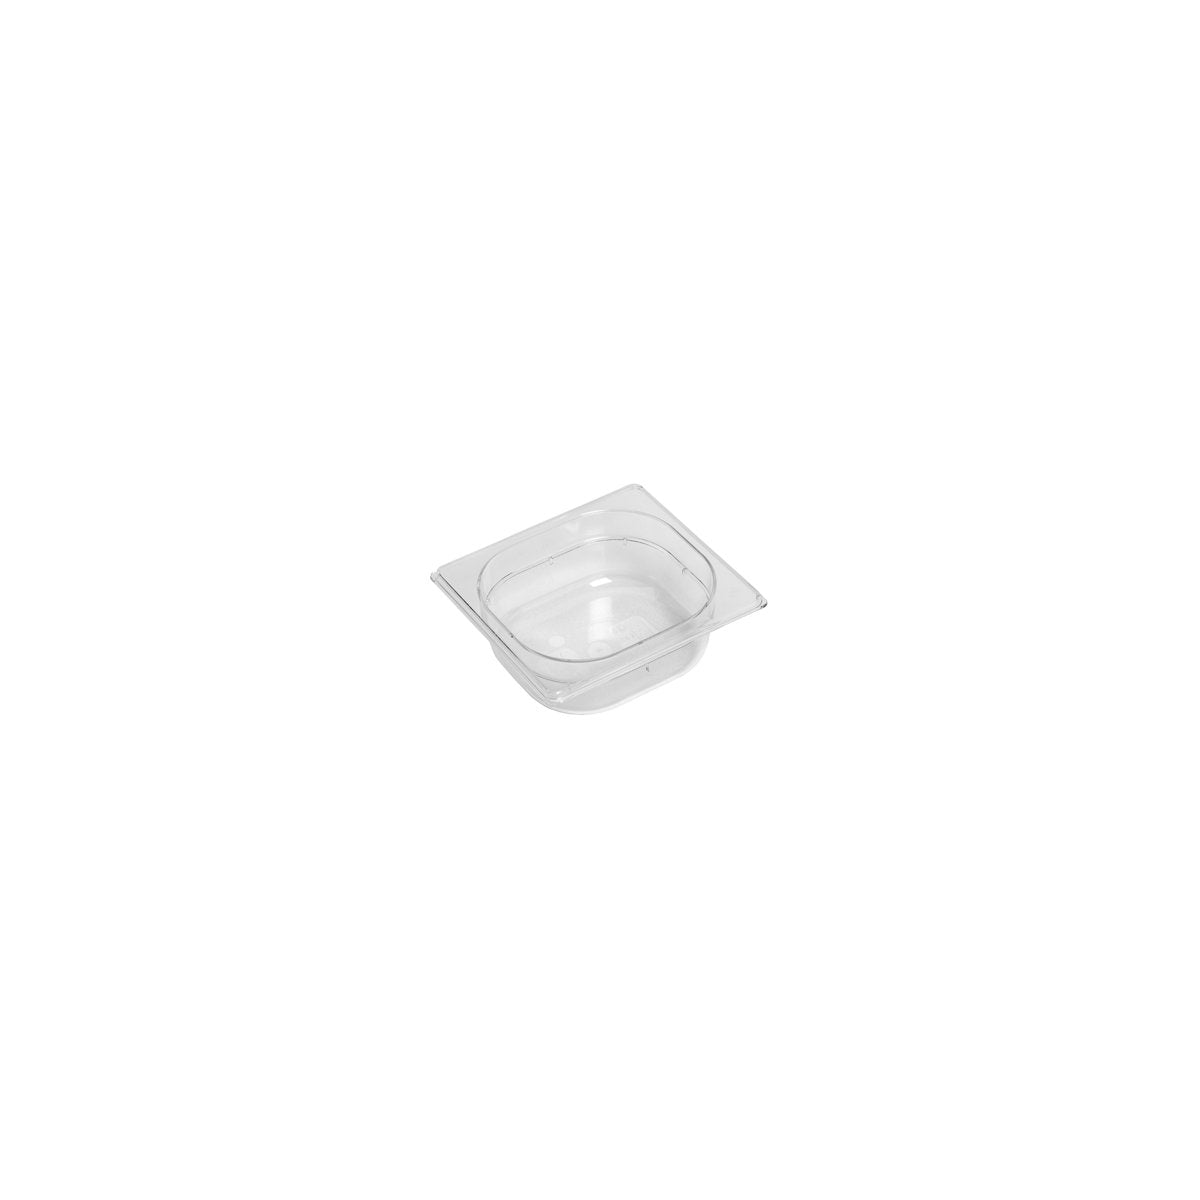 PC-16065CL Inox Macel Gastronorm Pan Polycarbonate Clear 1/6 Size 65mm Tomkin Australia Hospitality Supplies